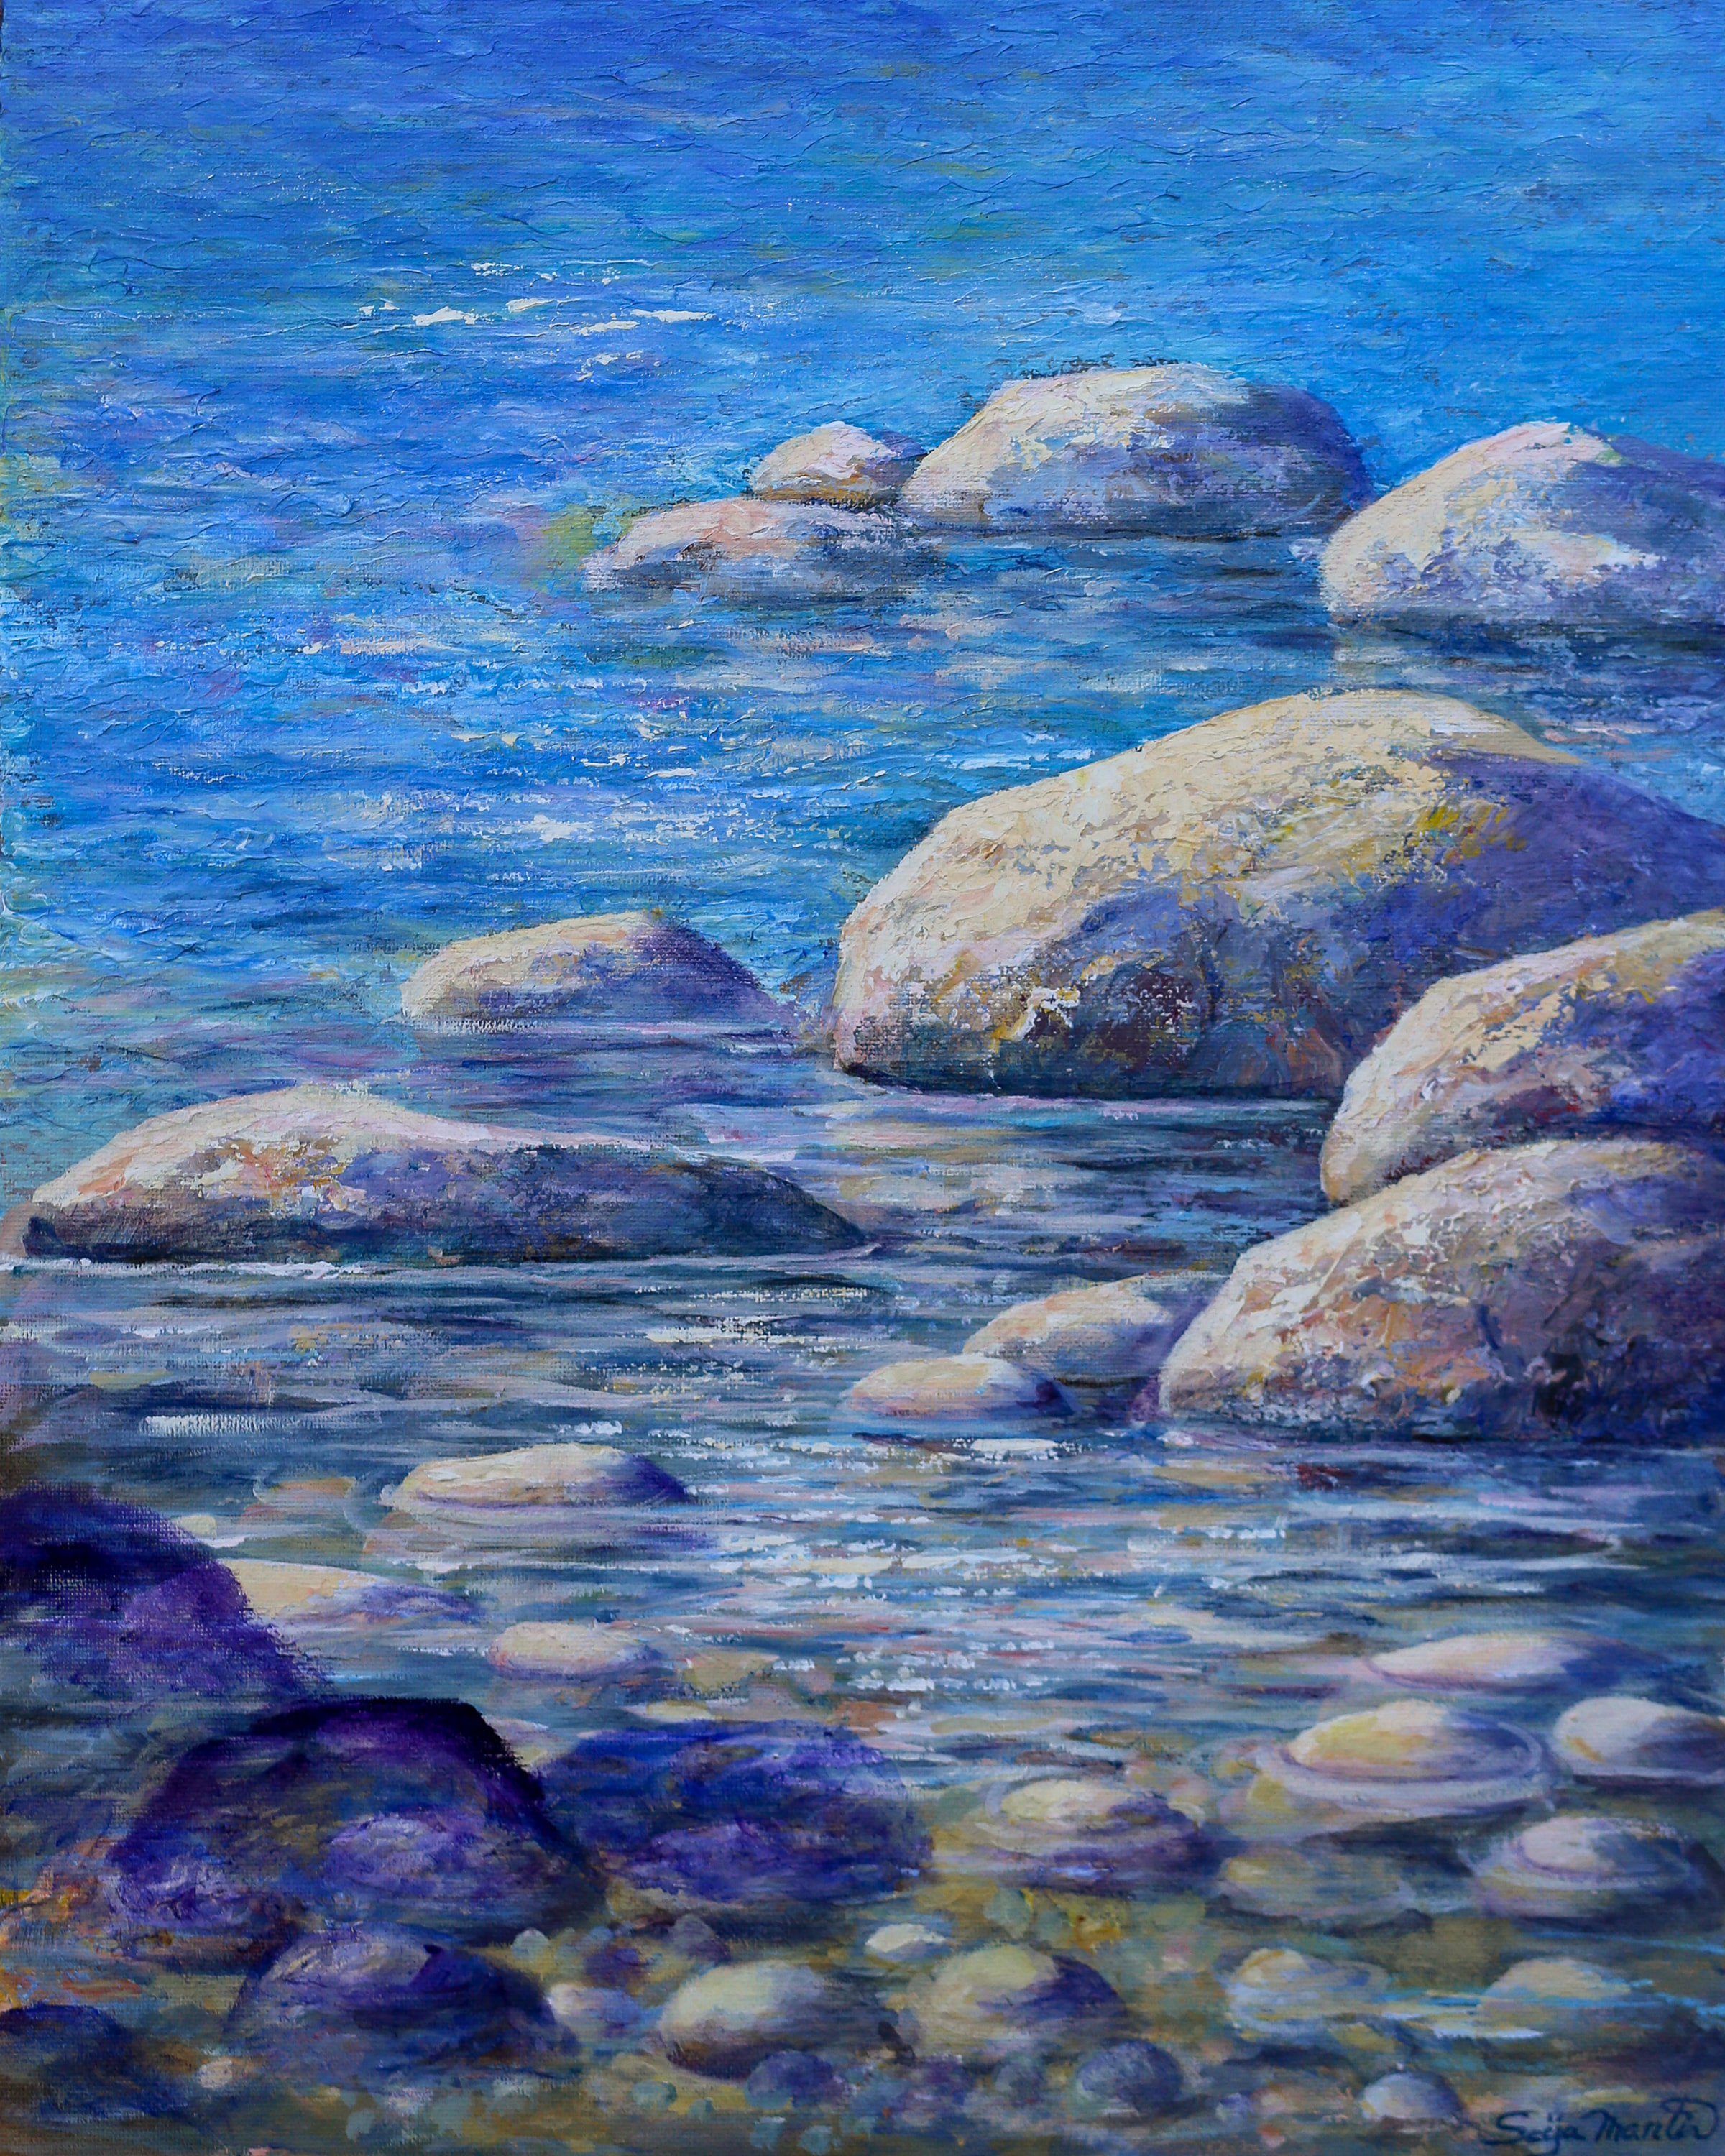 River Rocks - Acrylic Painting by Seija Martin at Art Works